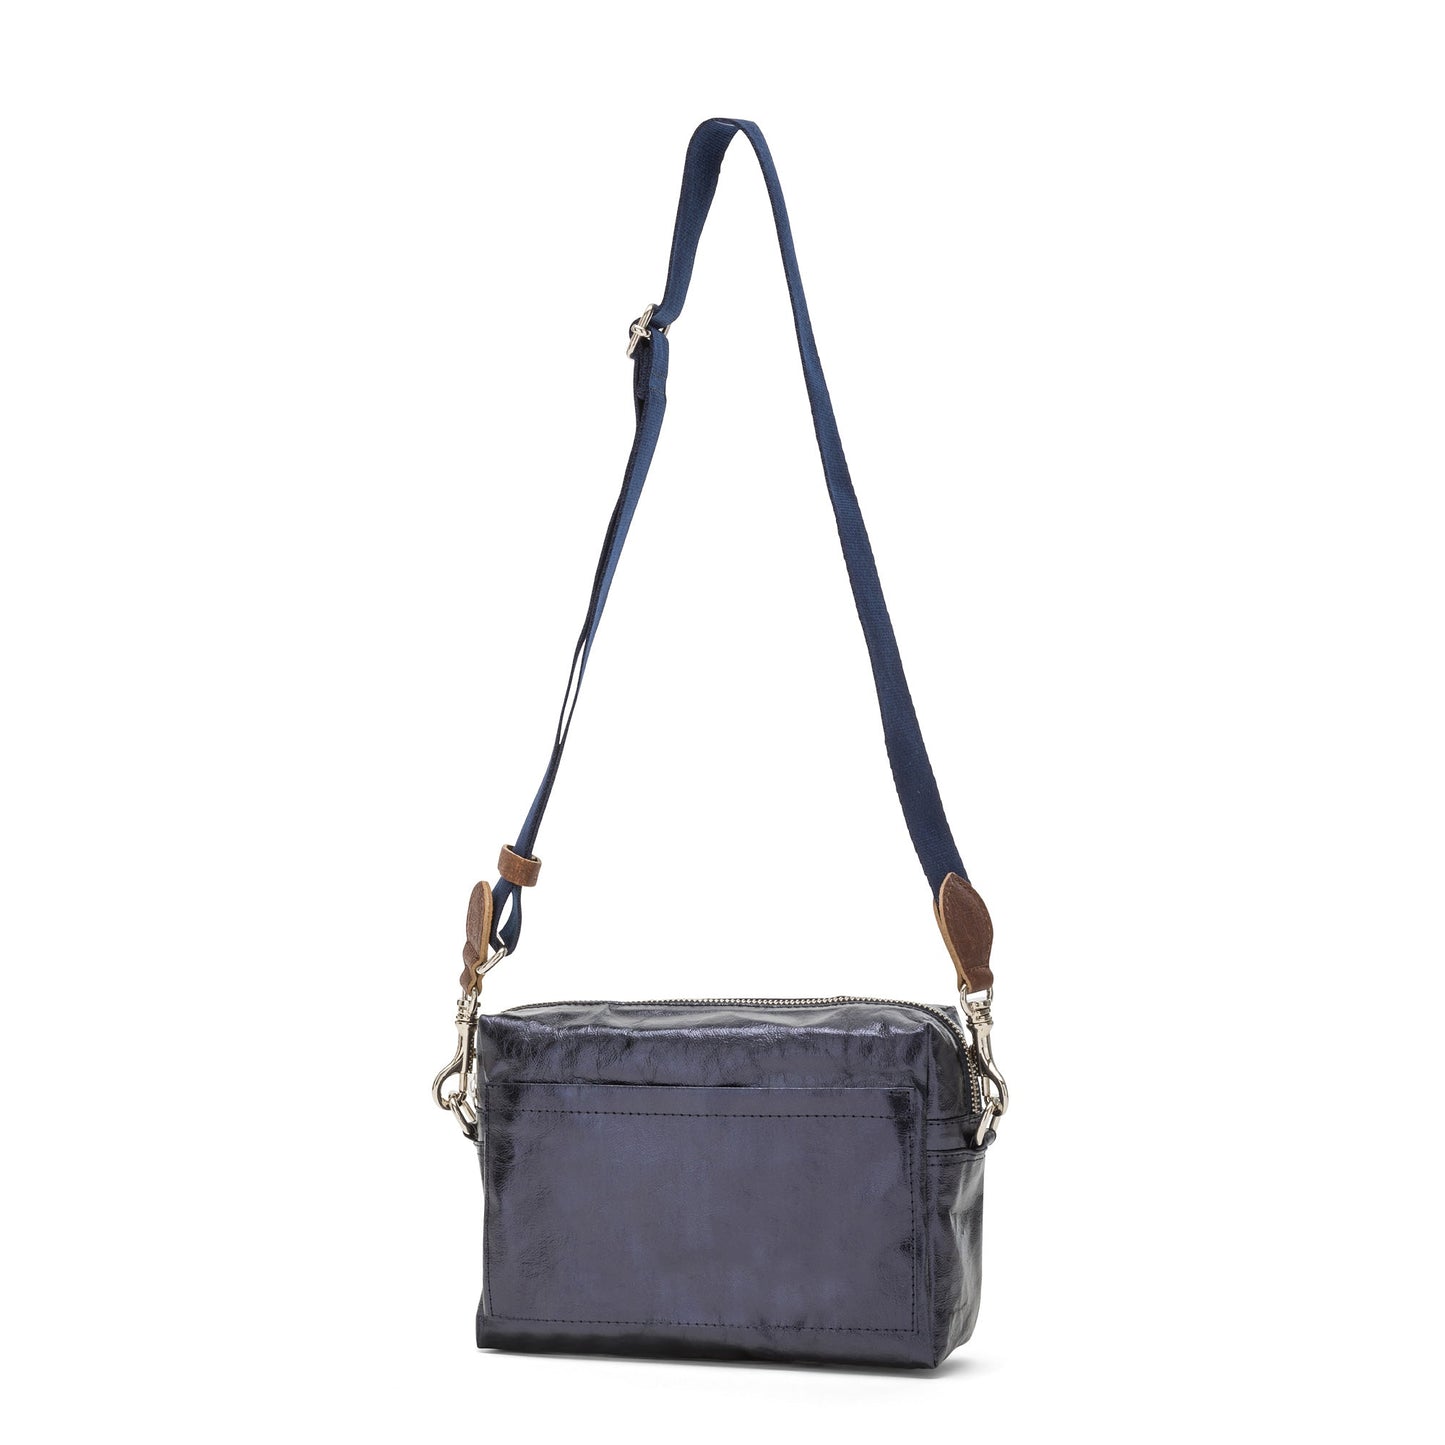 A rectangular washable paper handbag with an external side pocket is shown. The bag has a canvas strap, washable paper details and metal fastening clips to attach the straps to the bag. The bag closes by a zip. The bag shown is metallic navy with a navy strap.